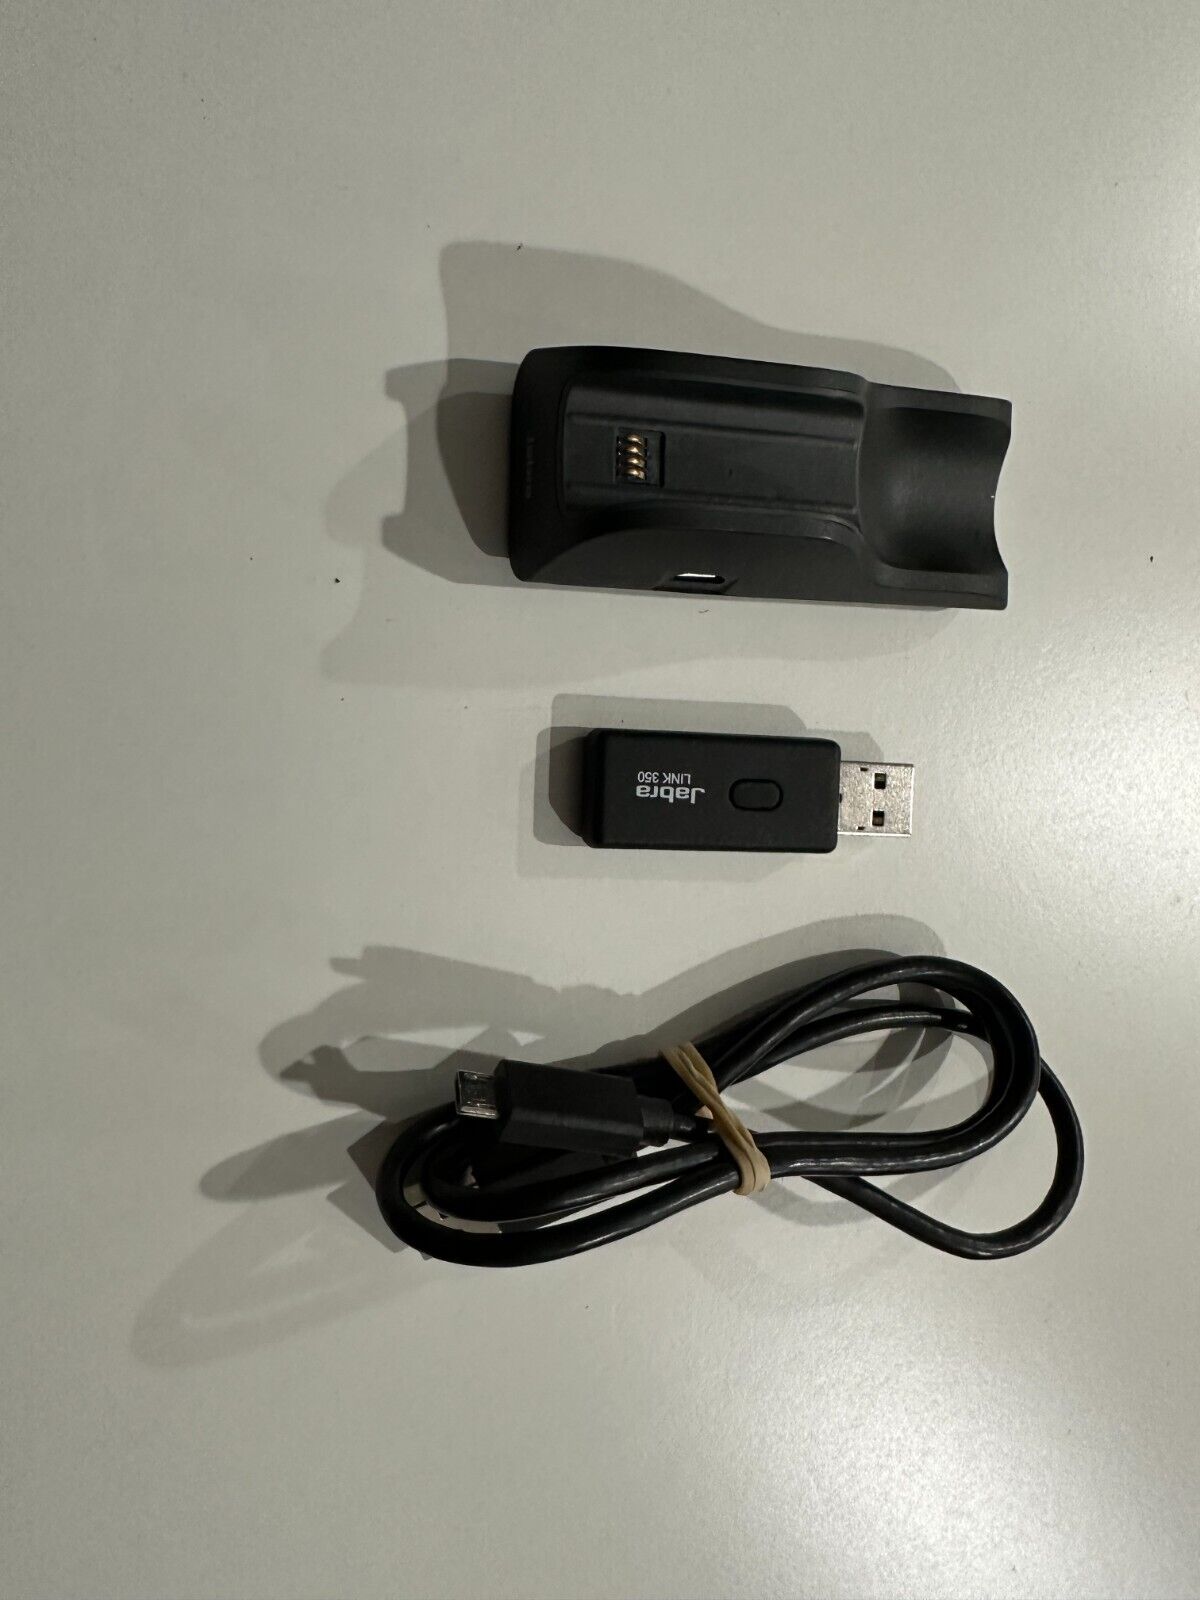 Jabra Link 350 END001W USB Receiver & Charger for 6430, 6400 Bluetooth Earpiece